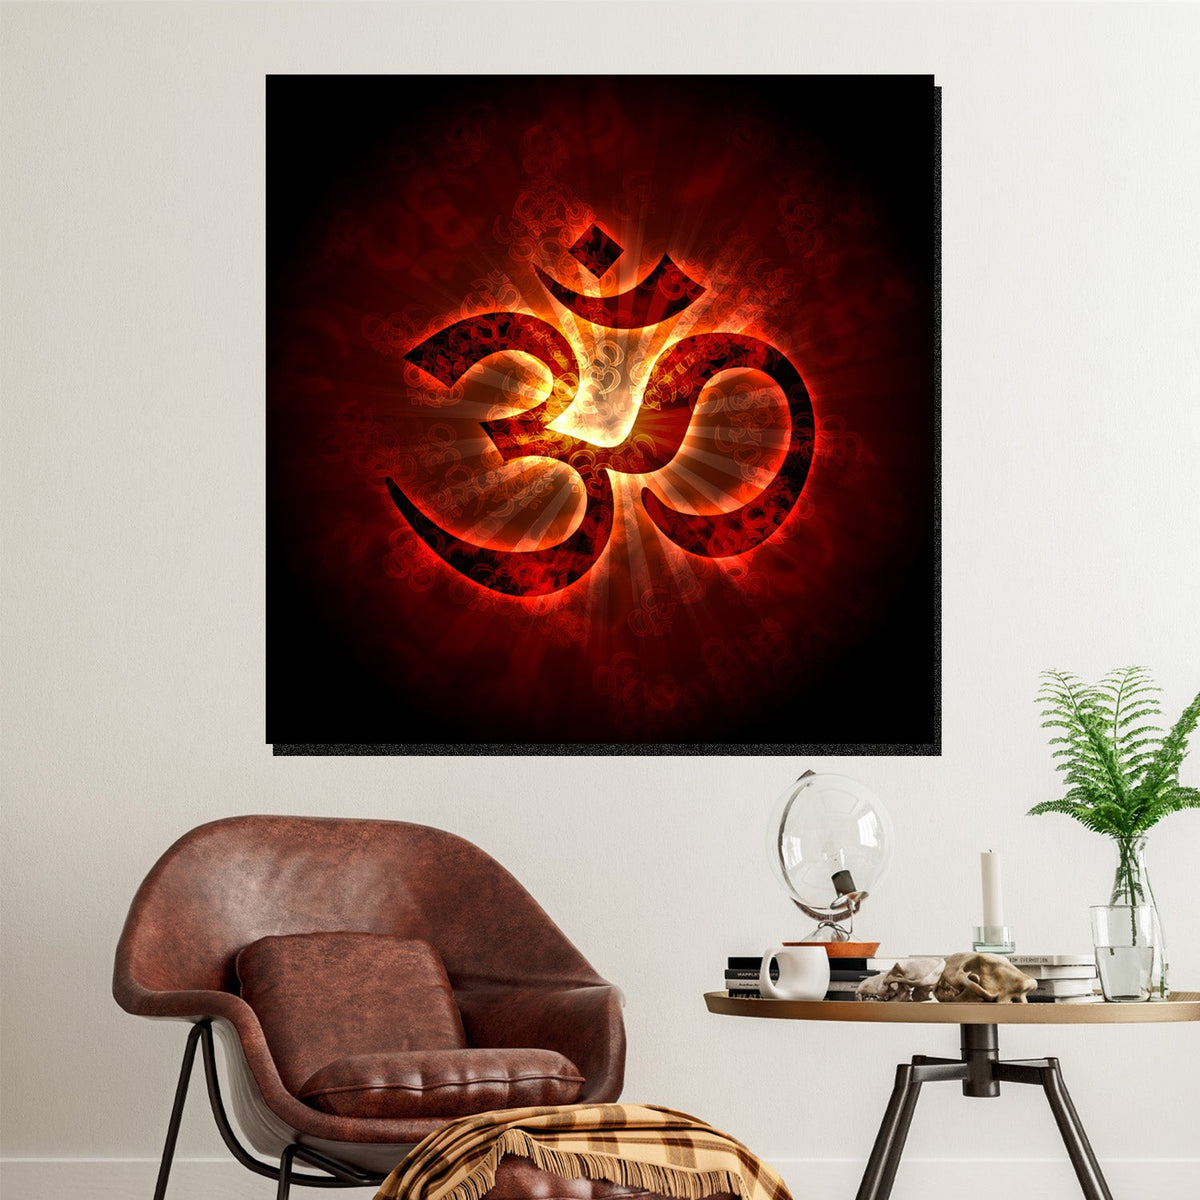 https://cdn.shopify.com/s/files/1/0387/9986/8044/products/GlowingOmCanvasArtprintStretched-2.jpg